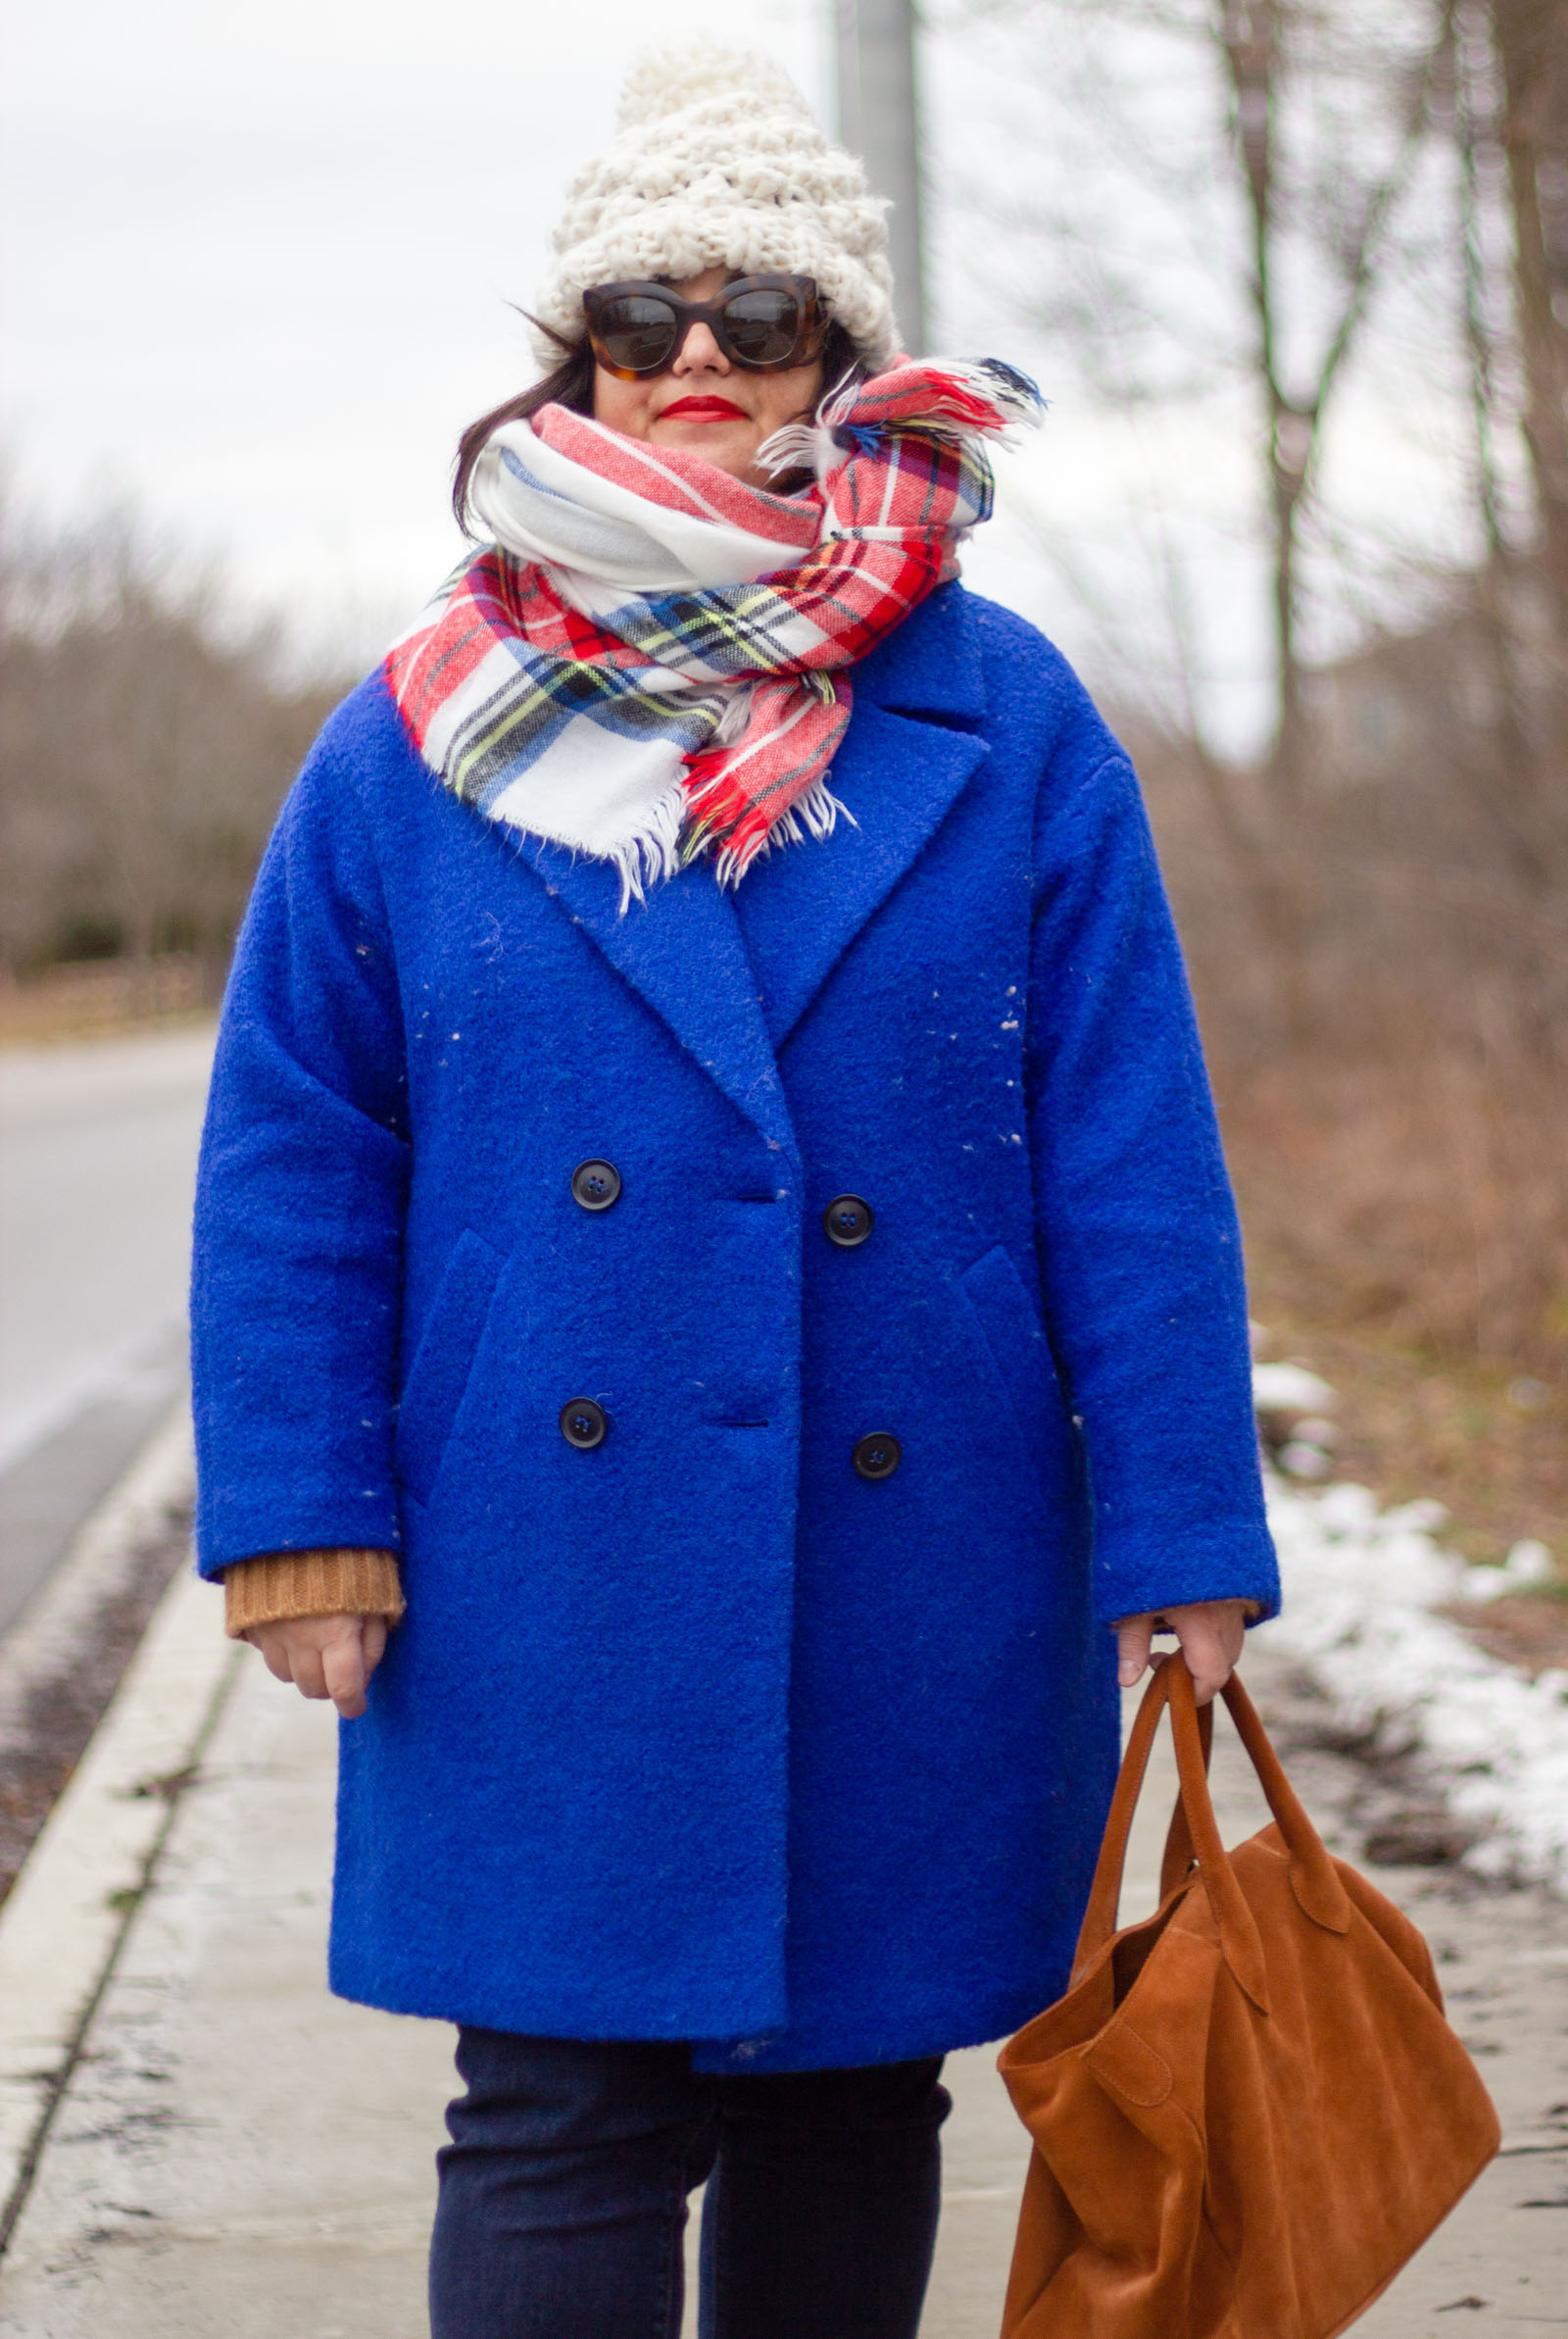 5 ways to wear a bright blue coat ⋆ chic everywhere